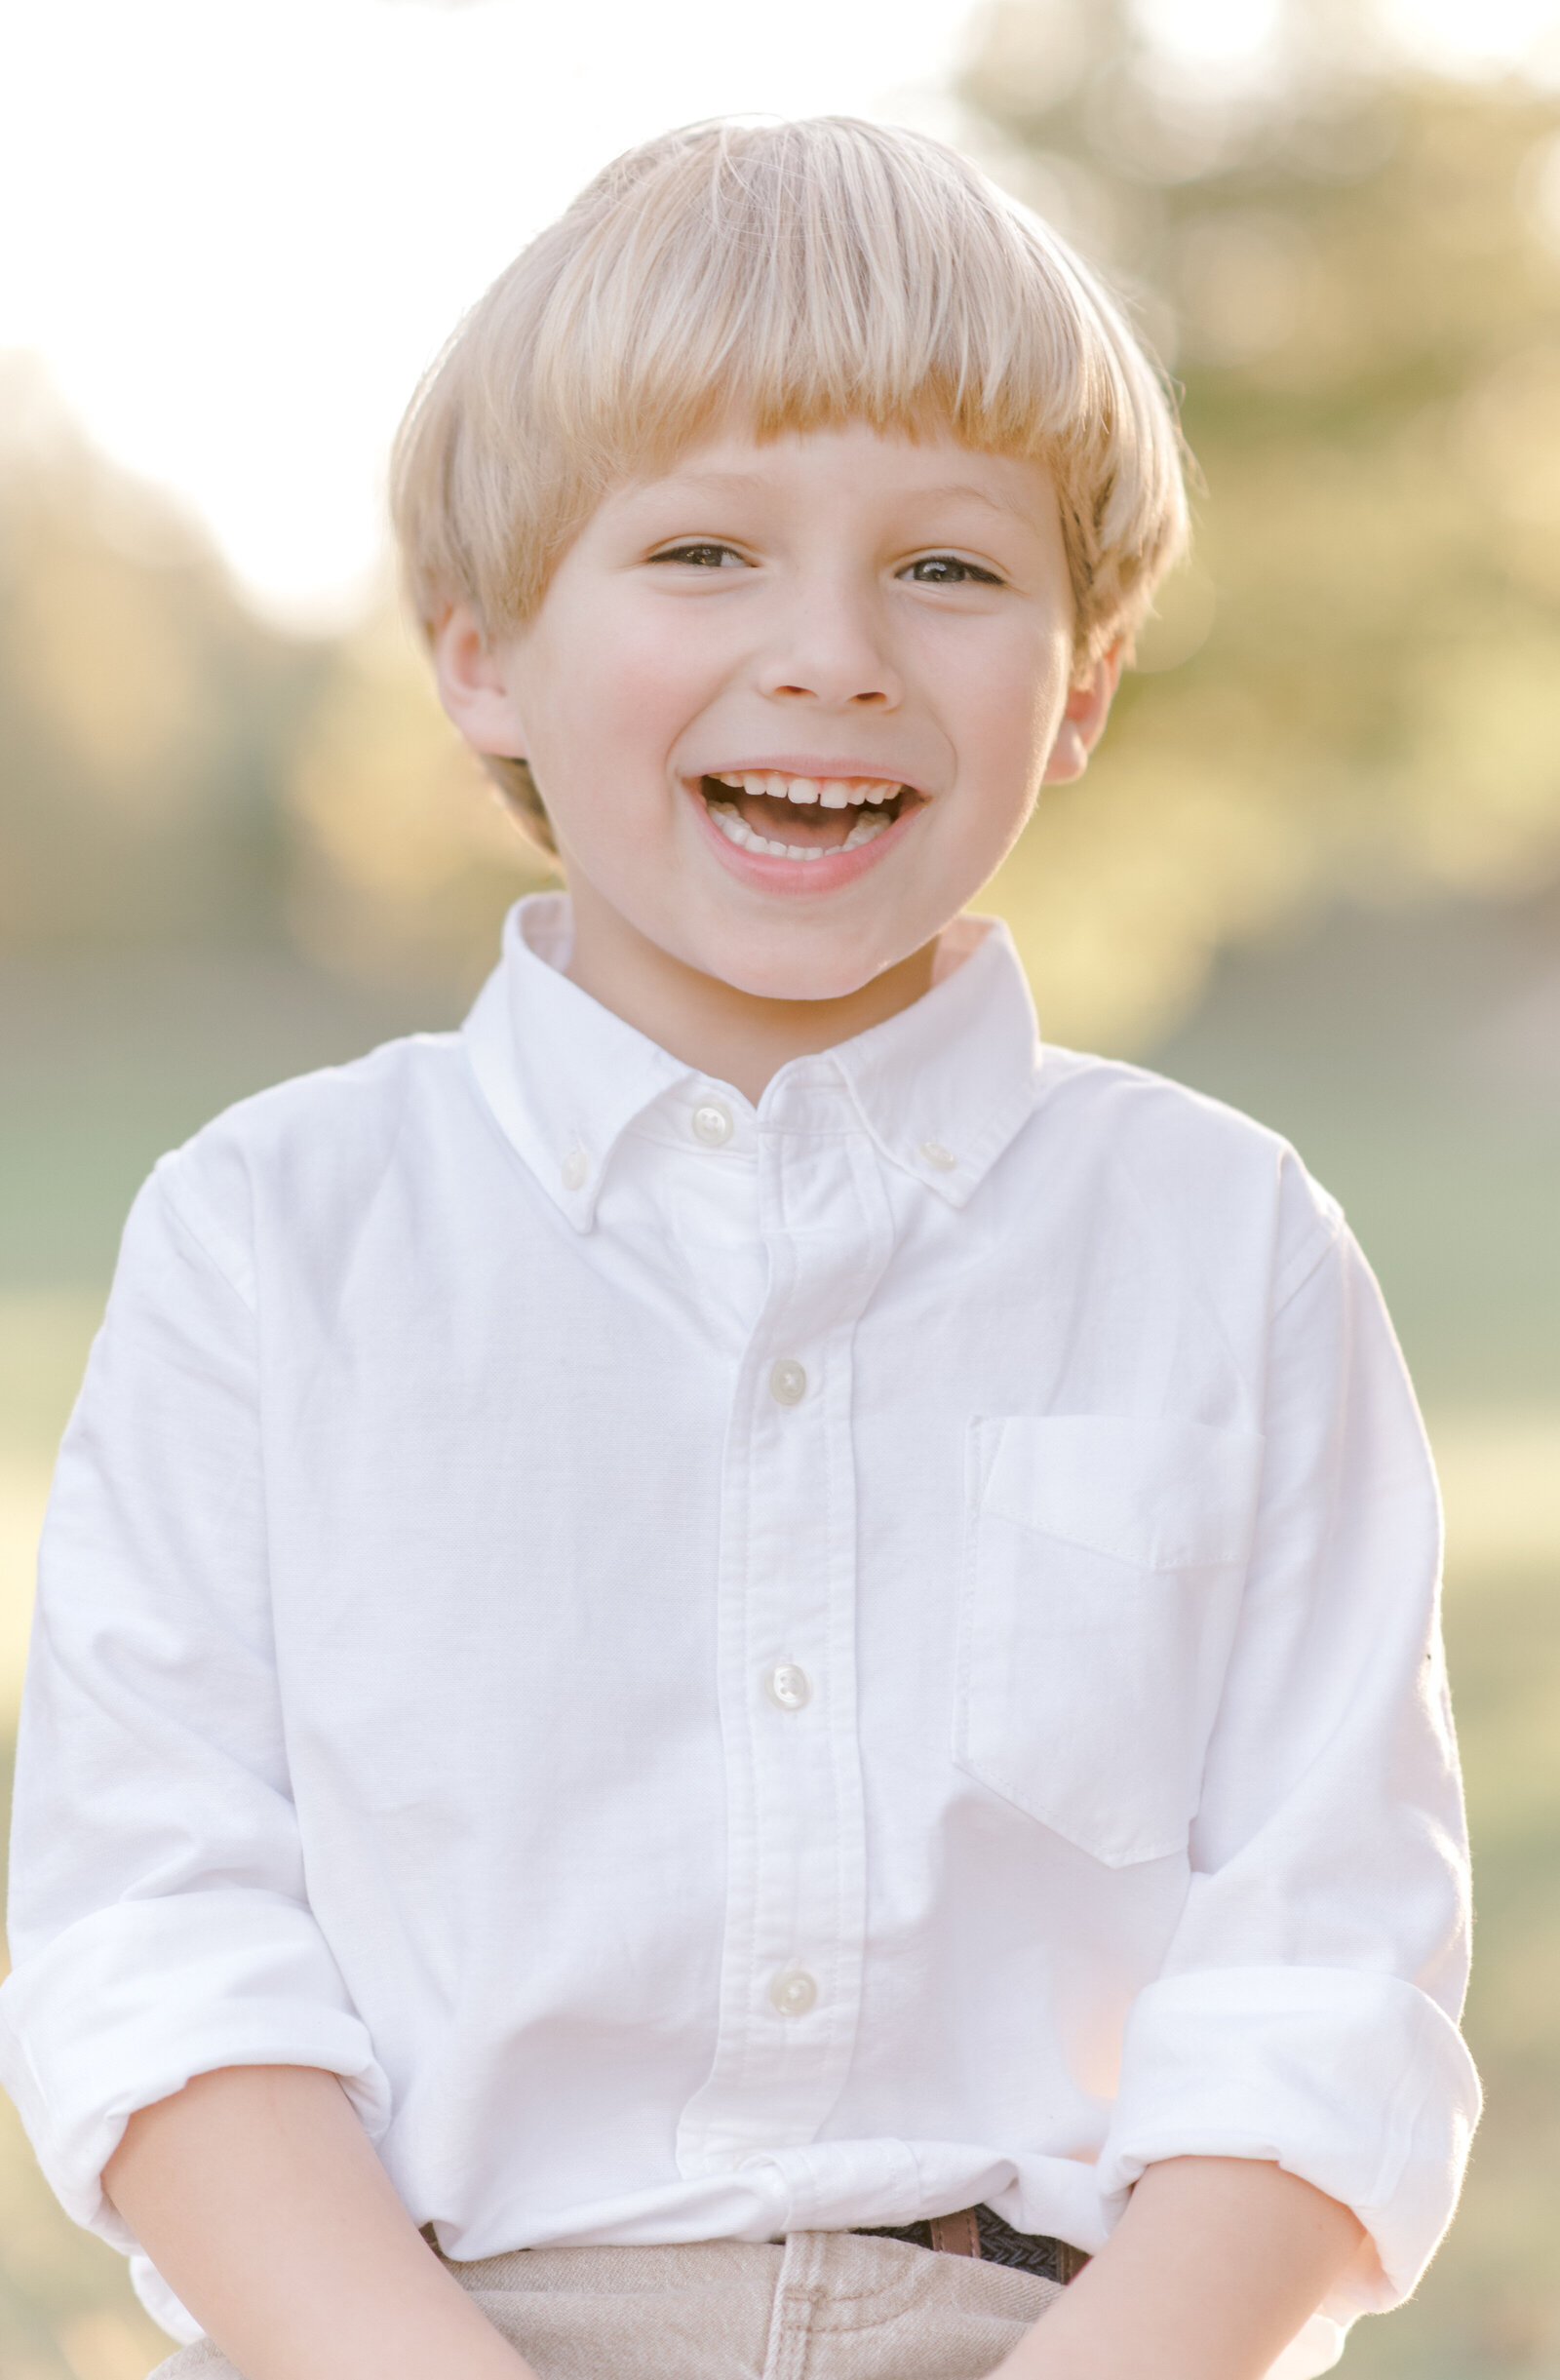 Young blonde boy smiling for portrait in Houston with sun setting behind him.